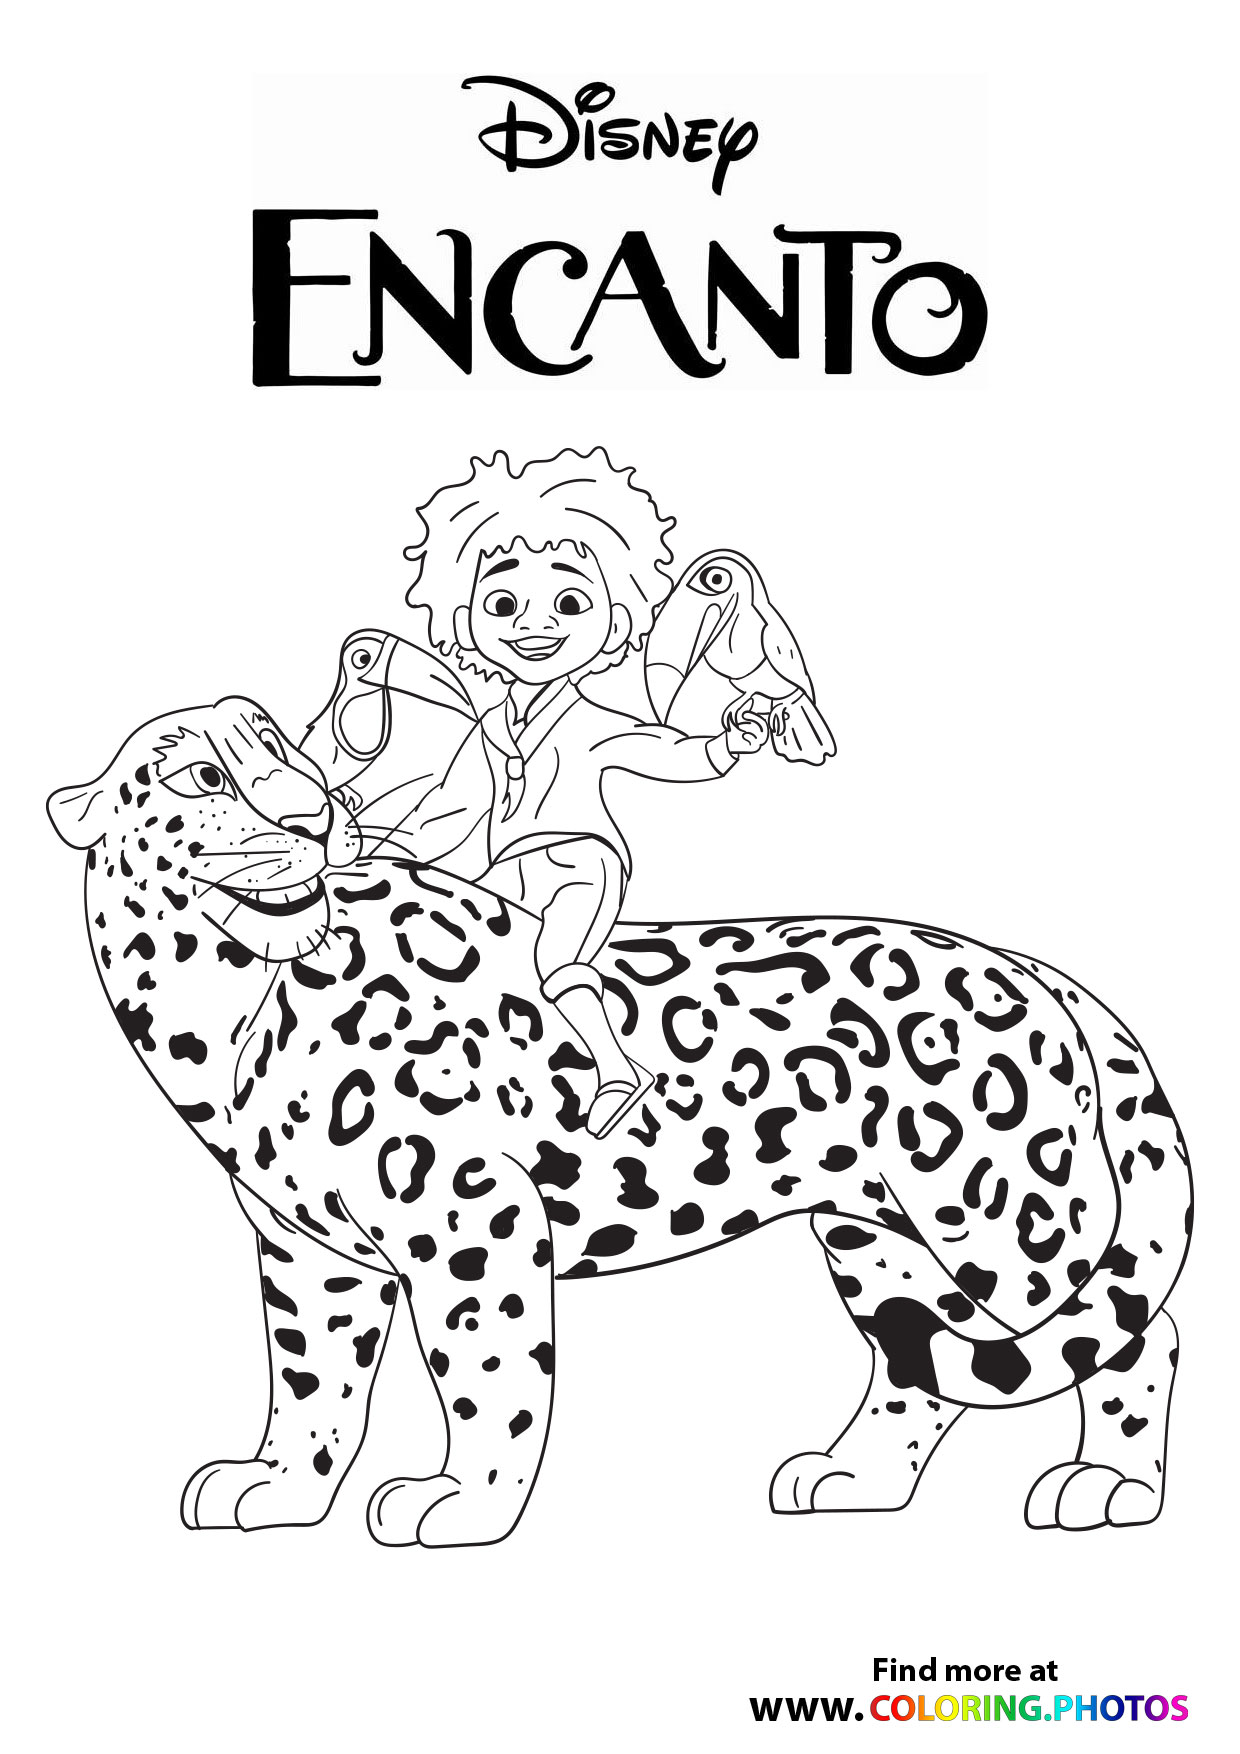 Disney Encanto Coloring Pages for kids Free coloring